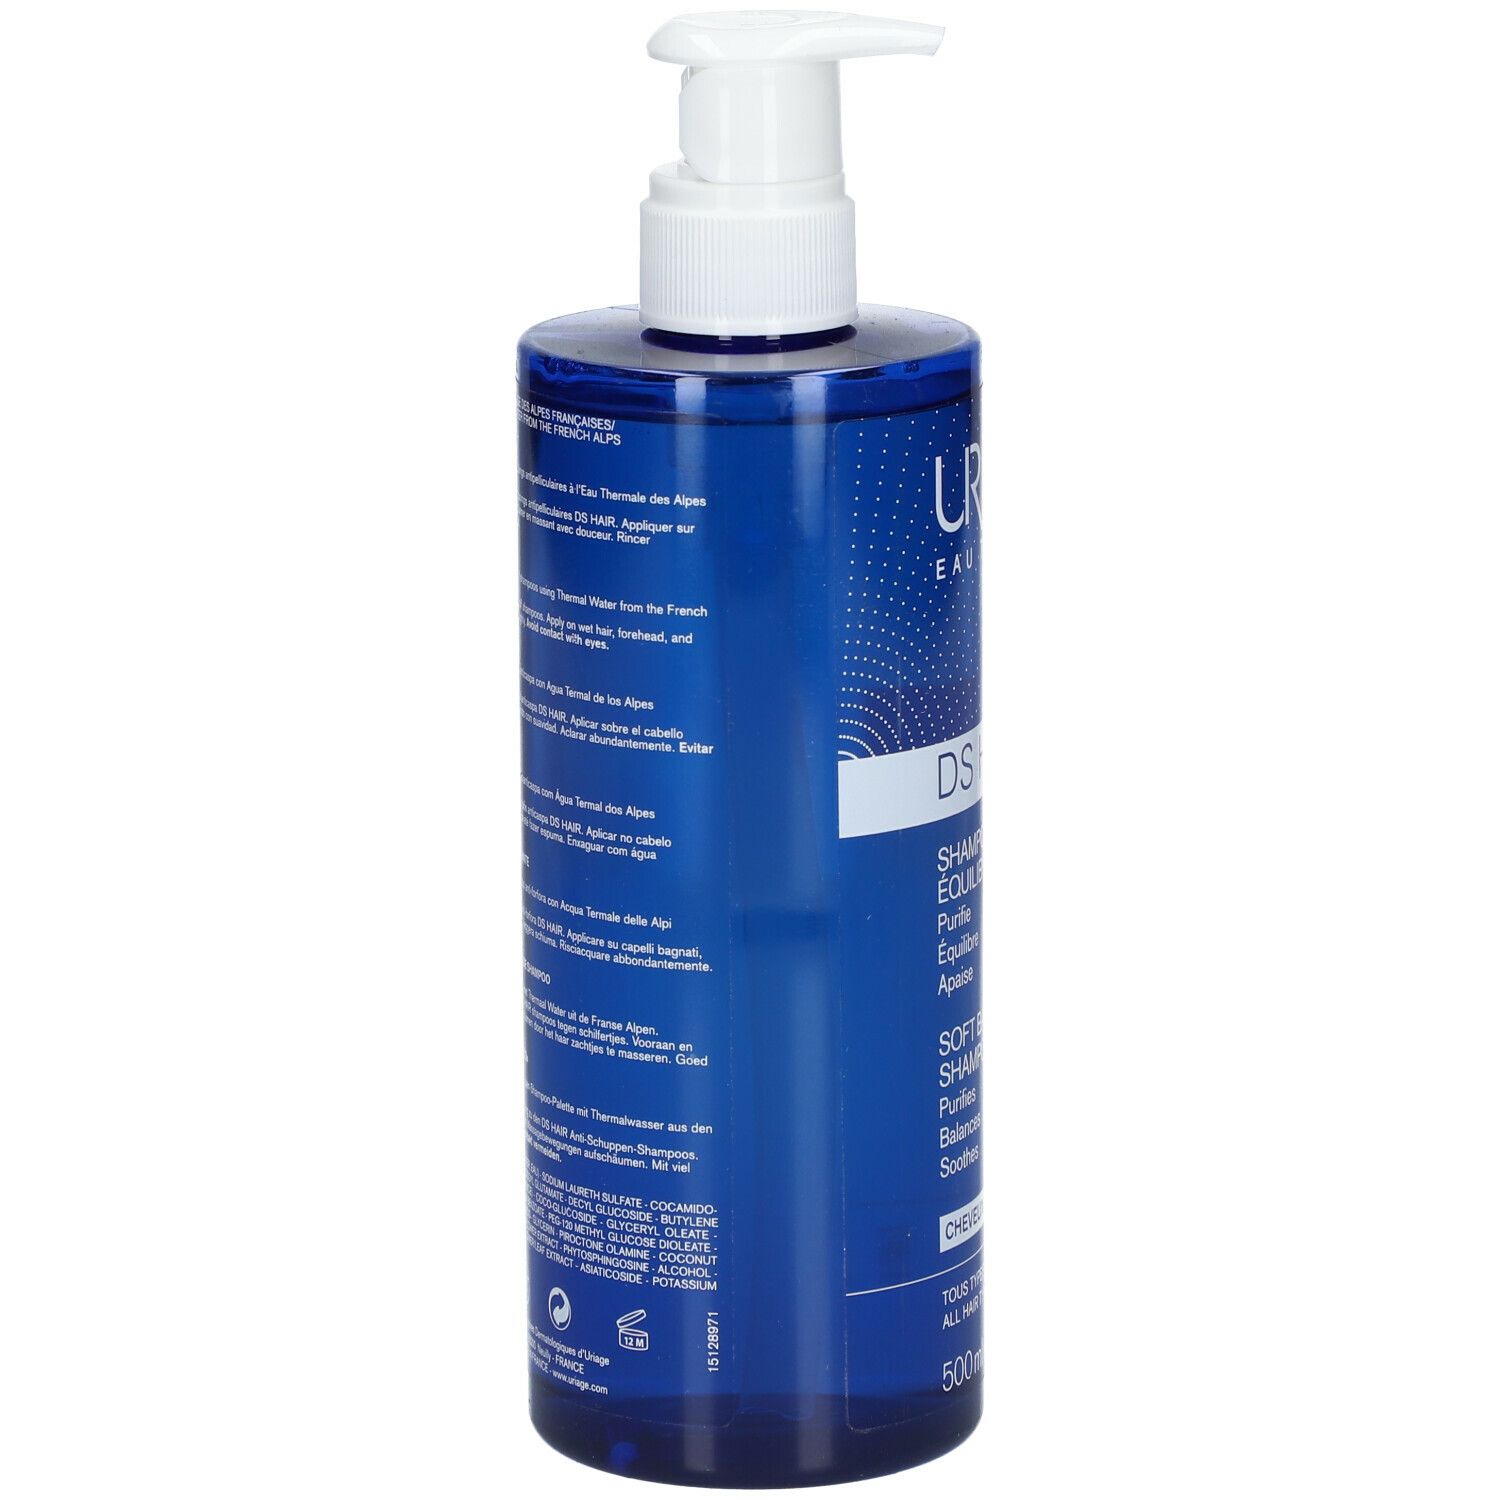 URIAGE DS Hair Shampoo Delicato Riequilibrante